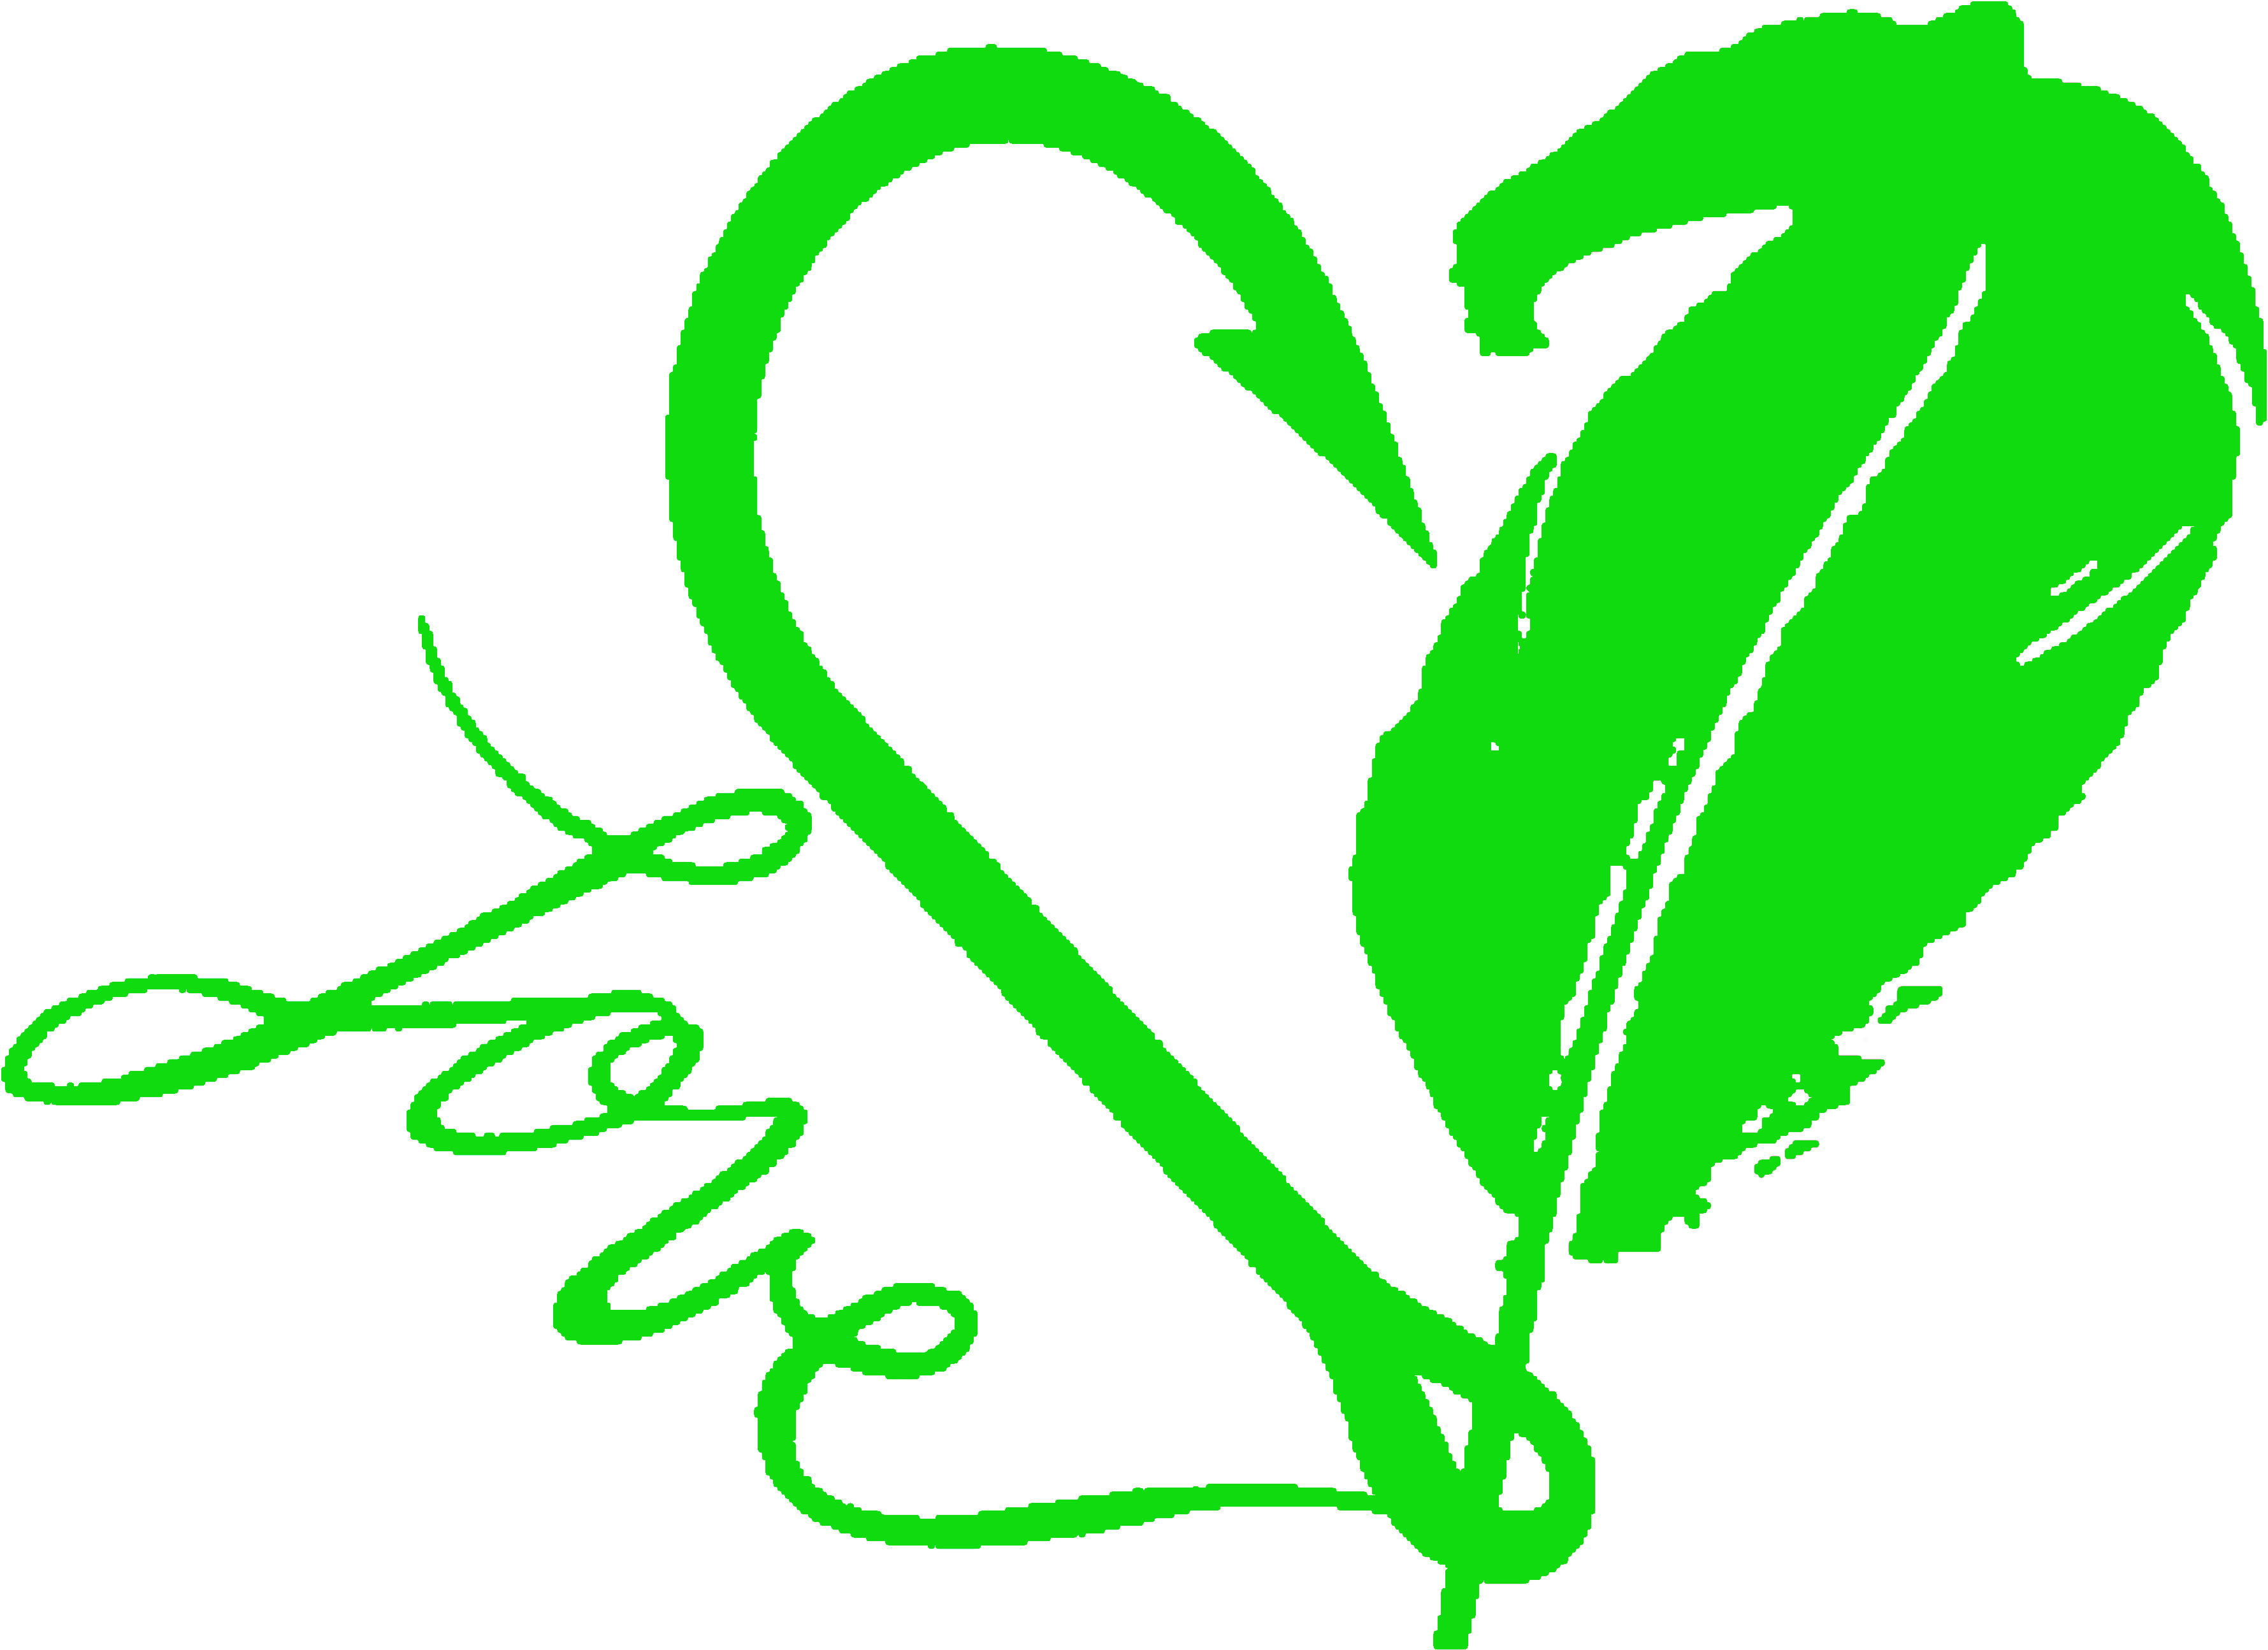 Love Fish Hook & Feather Decal - Fish Hook (3618x2664)